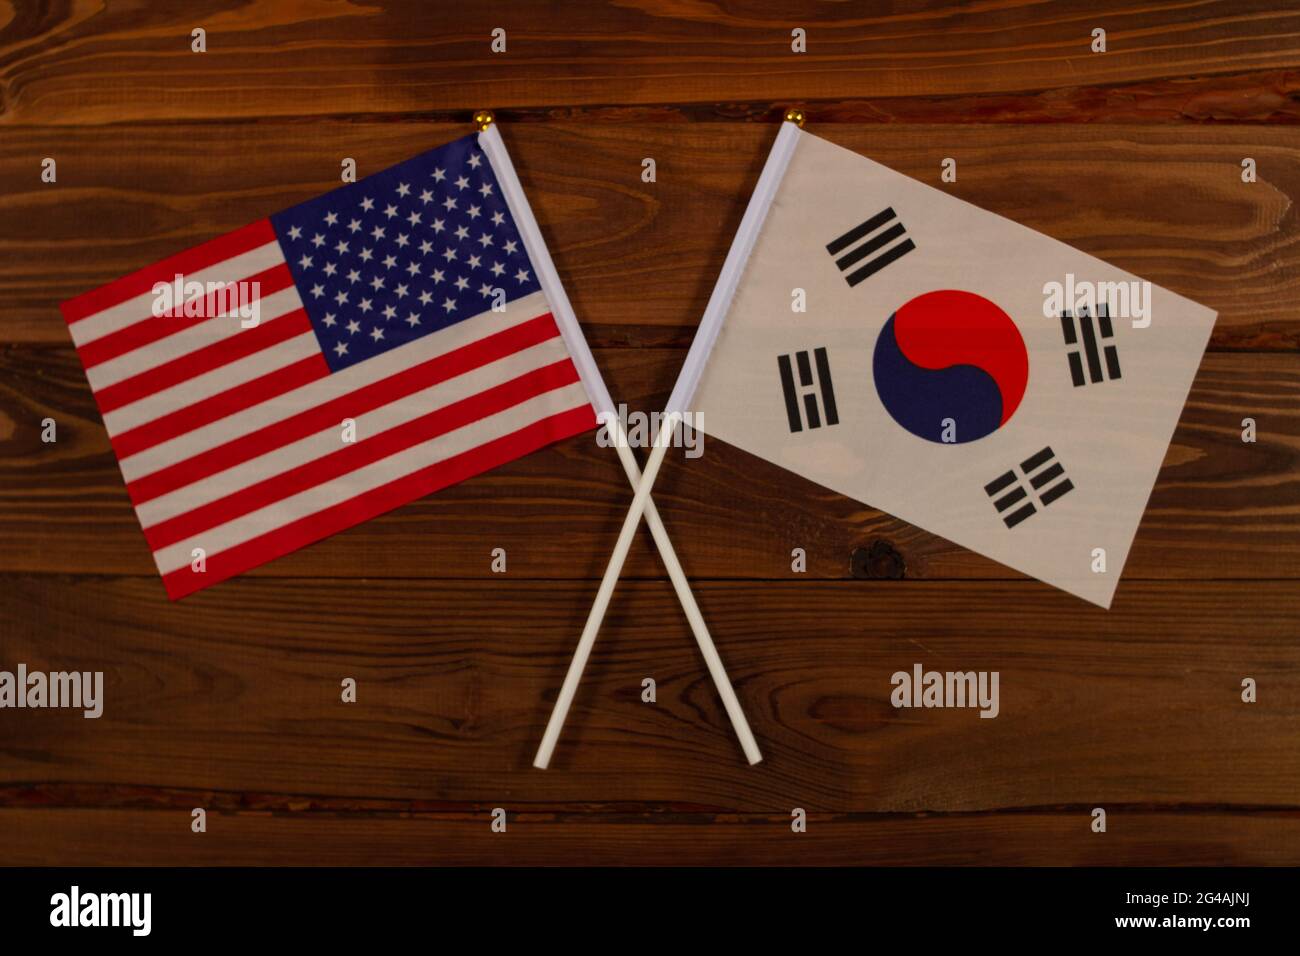 Flag of USA and flag of South Korea crossed with each other. USA vs South Korea. The image illustrates the relationship between countries. Photography Stock Photo